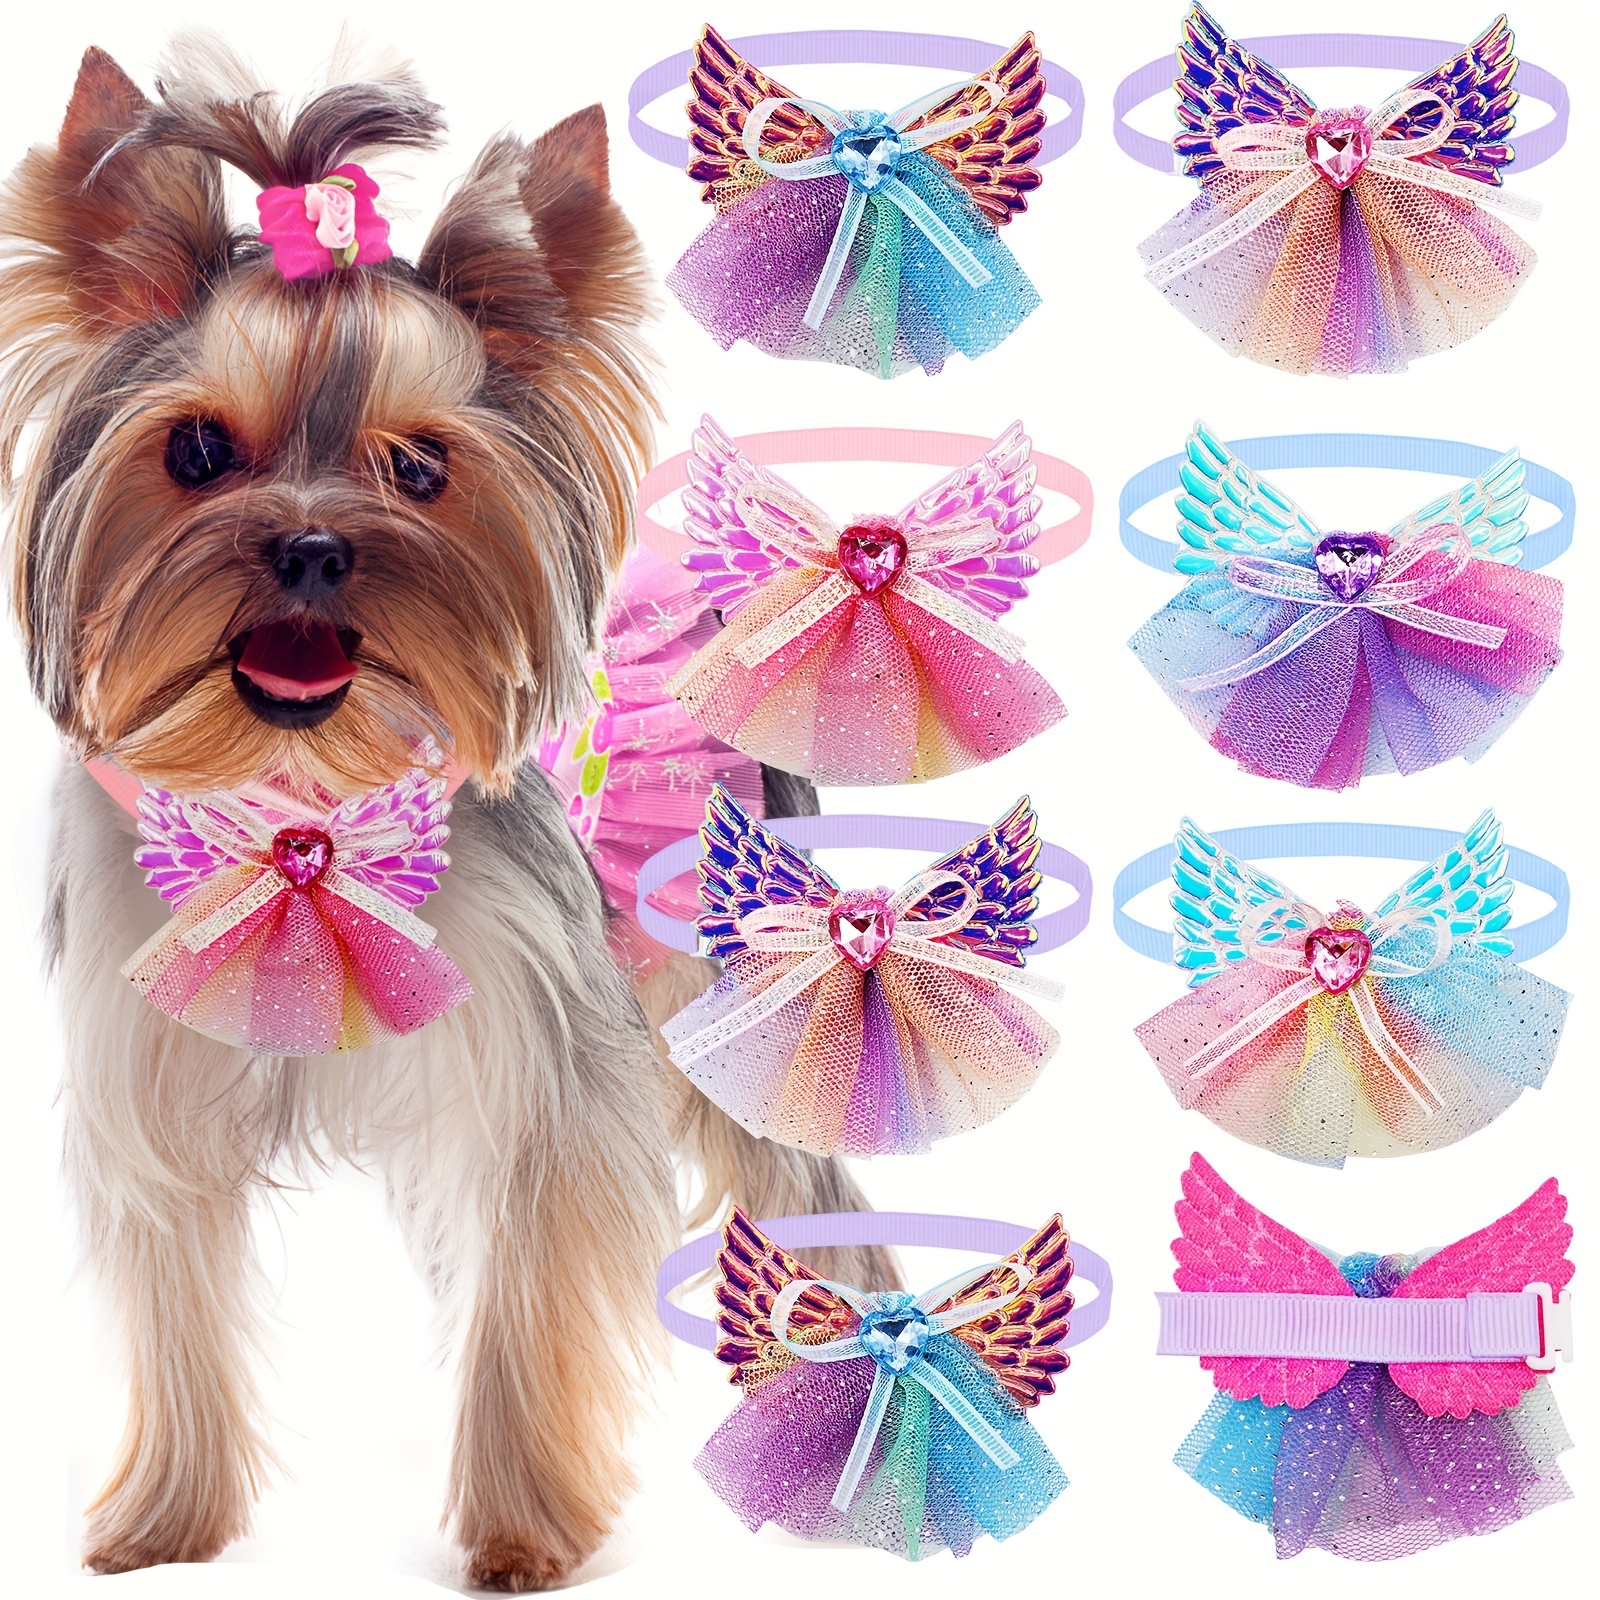 

10pcs Lace Dog Bow Tie, Puppy Dog Bow Tie, Wedding Dog Supplies, Dog Beauty Accessories